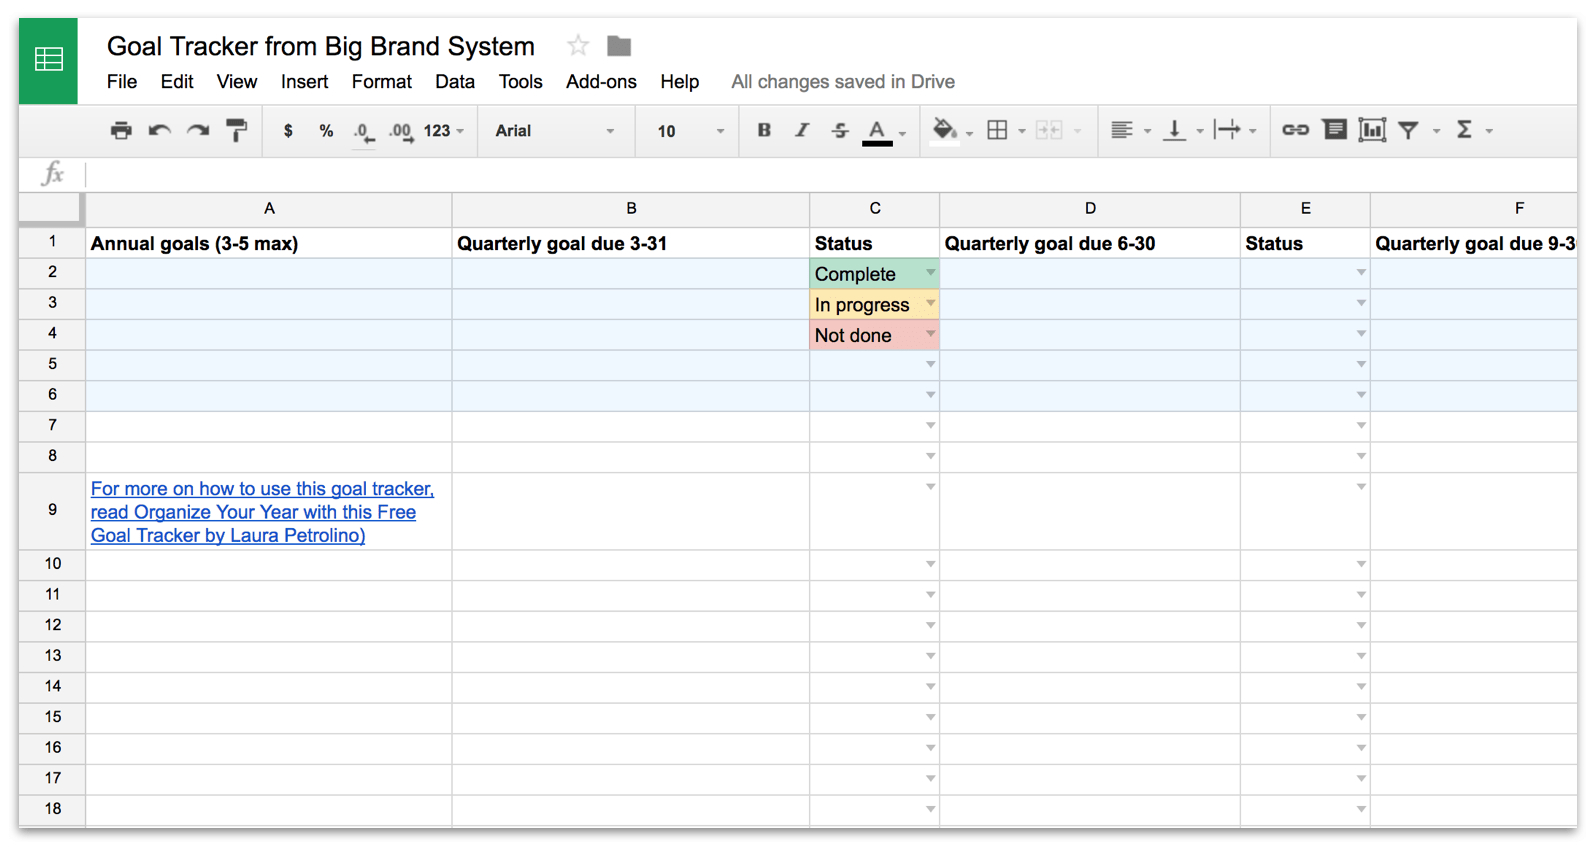 Goals Spreadsheet In Organize Your Year With This Free Goal Tracker